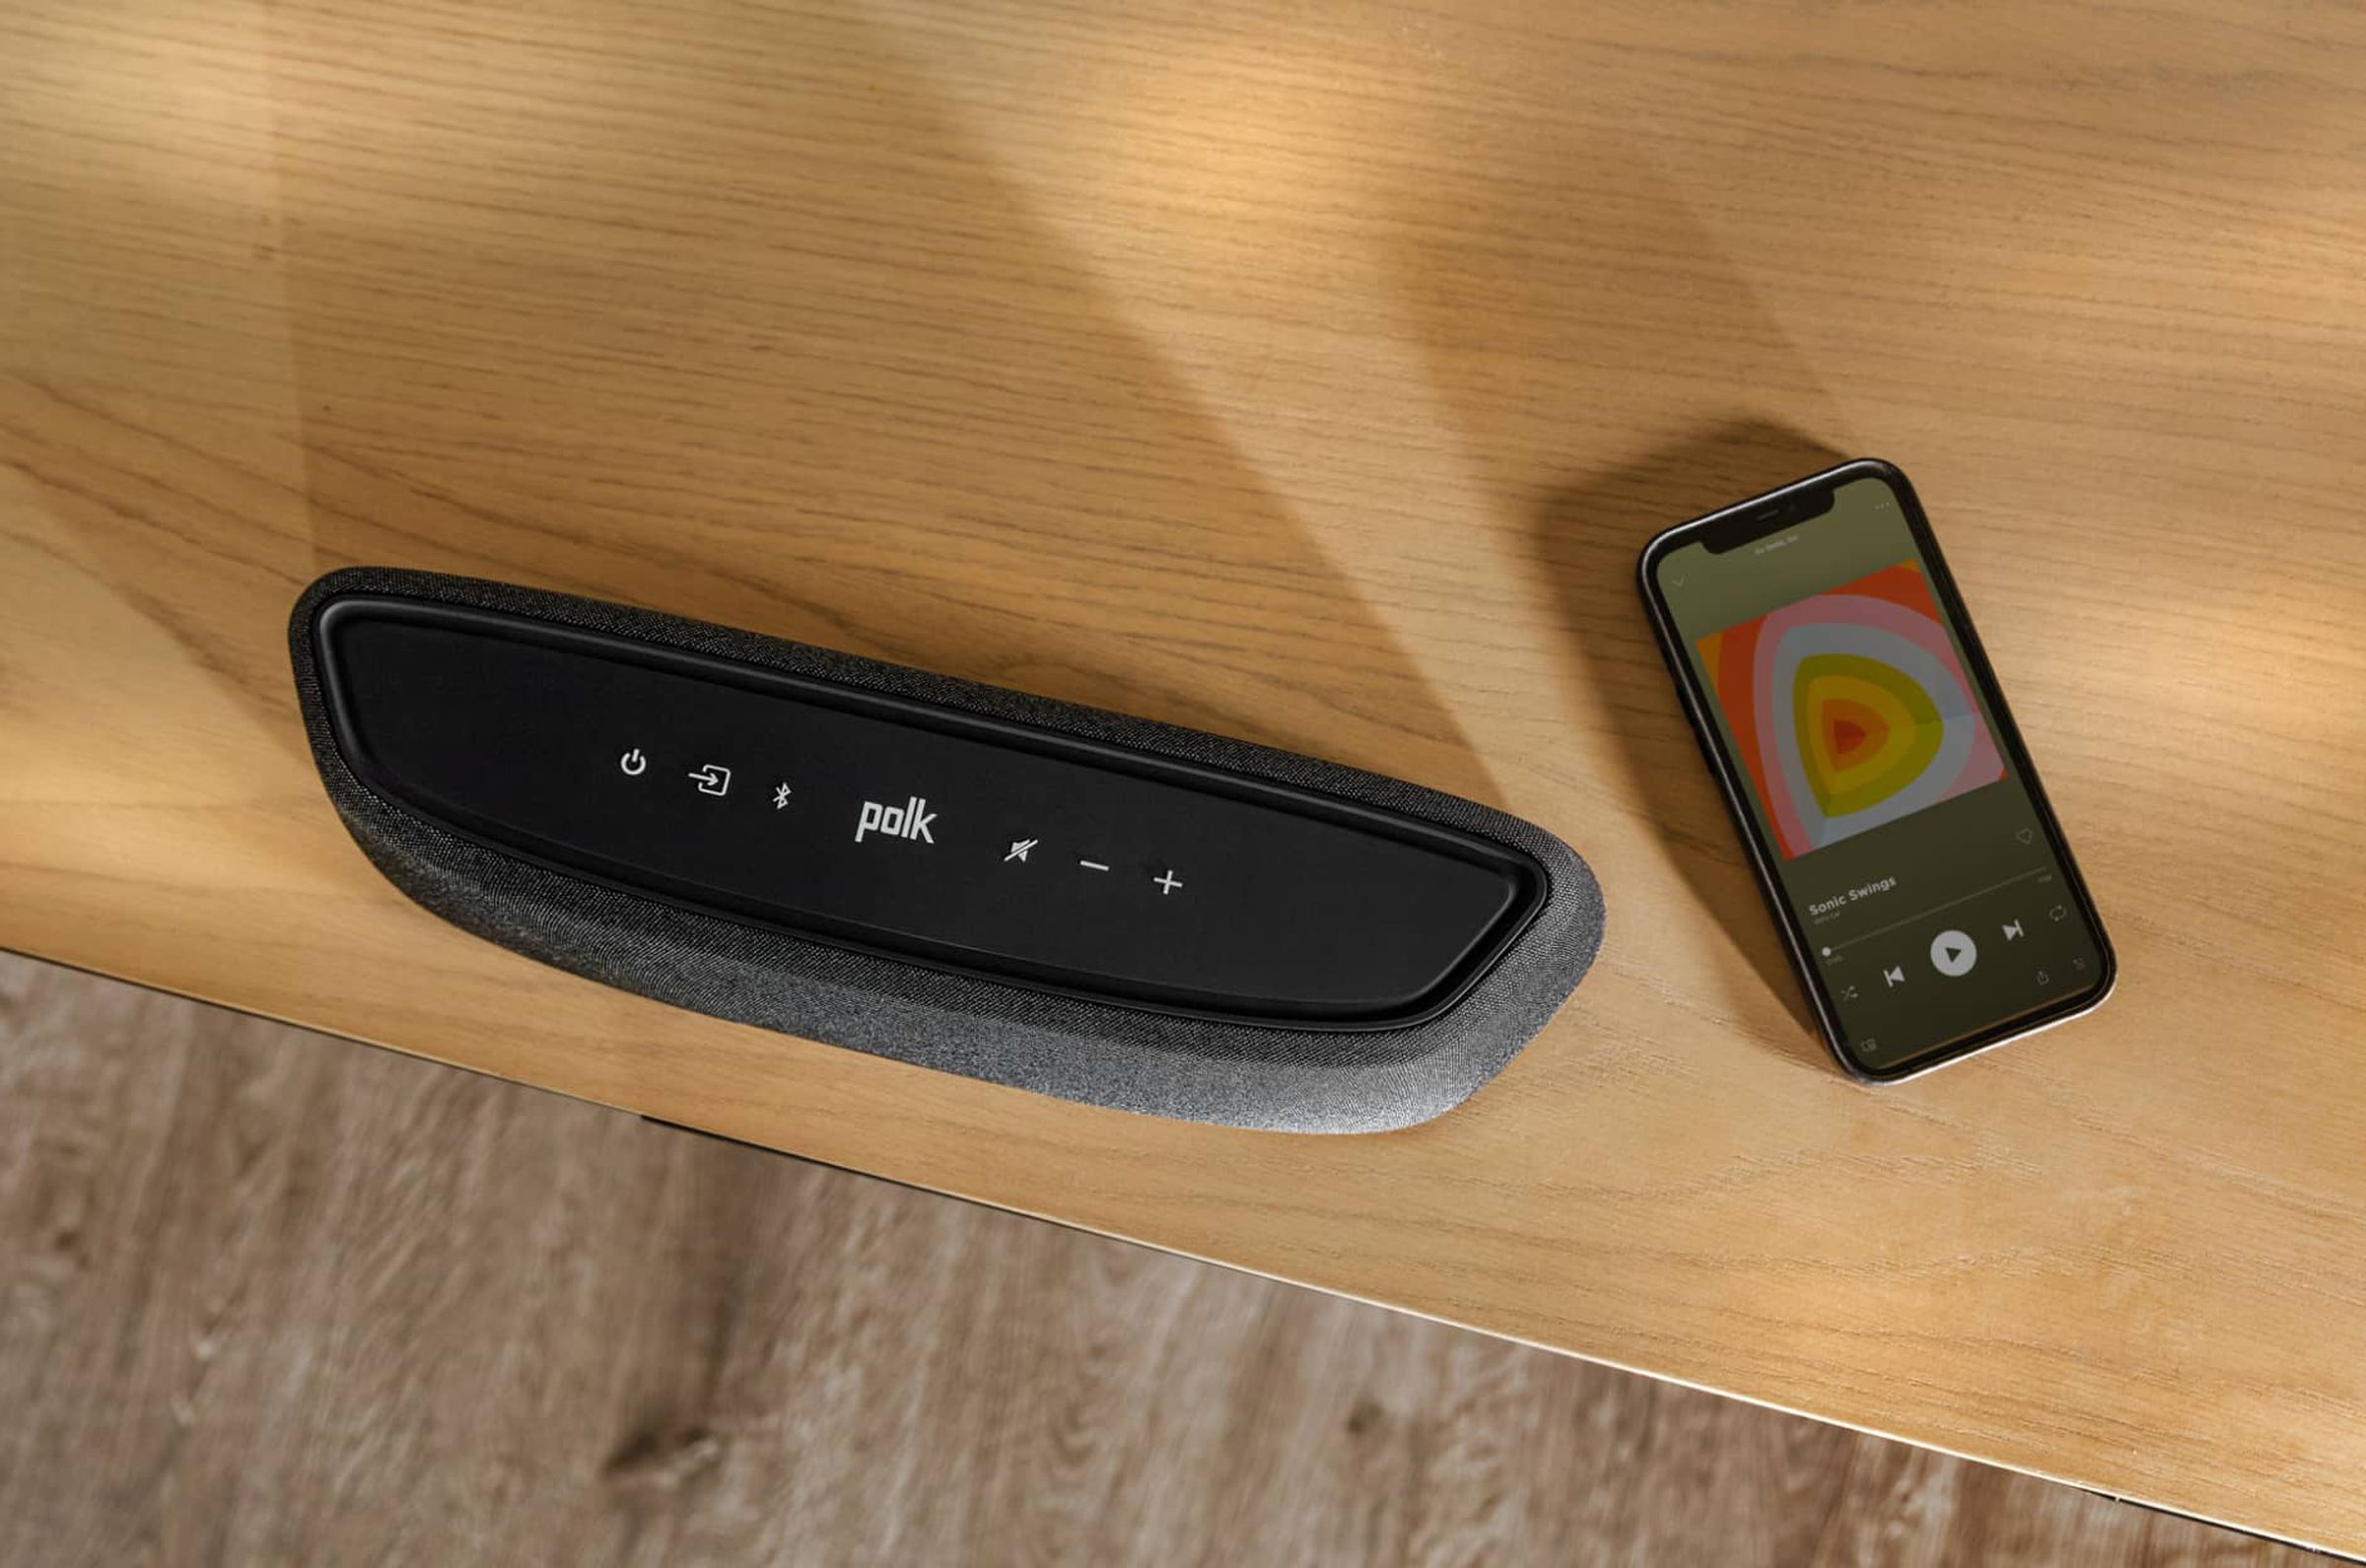 Most soundbars dwarf an iPhone in size, but not this one.